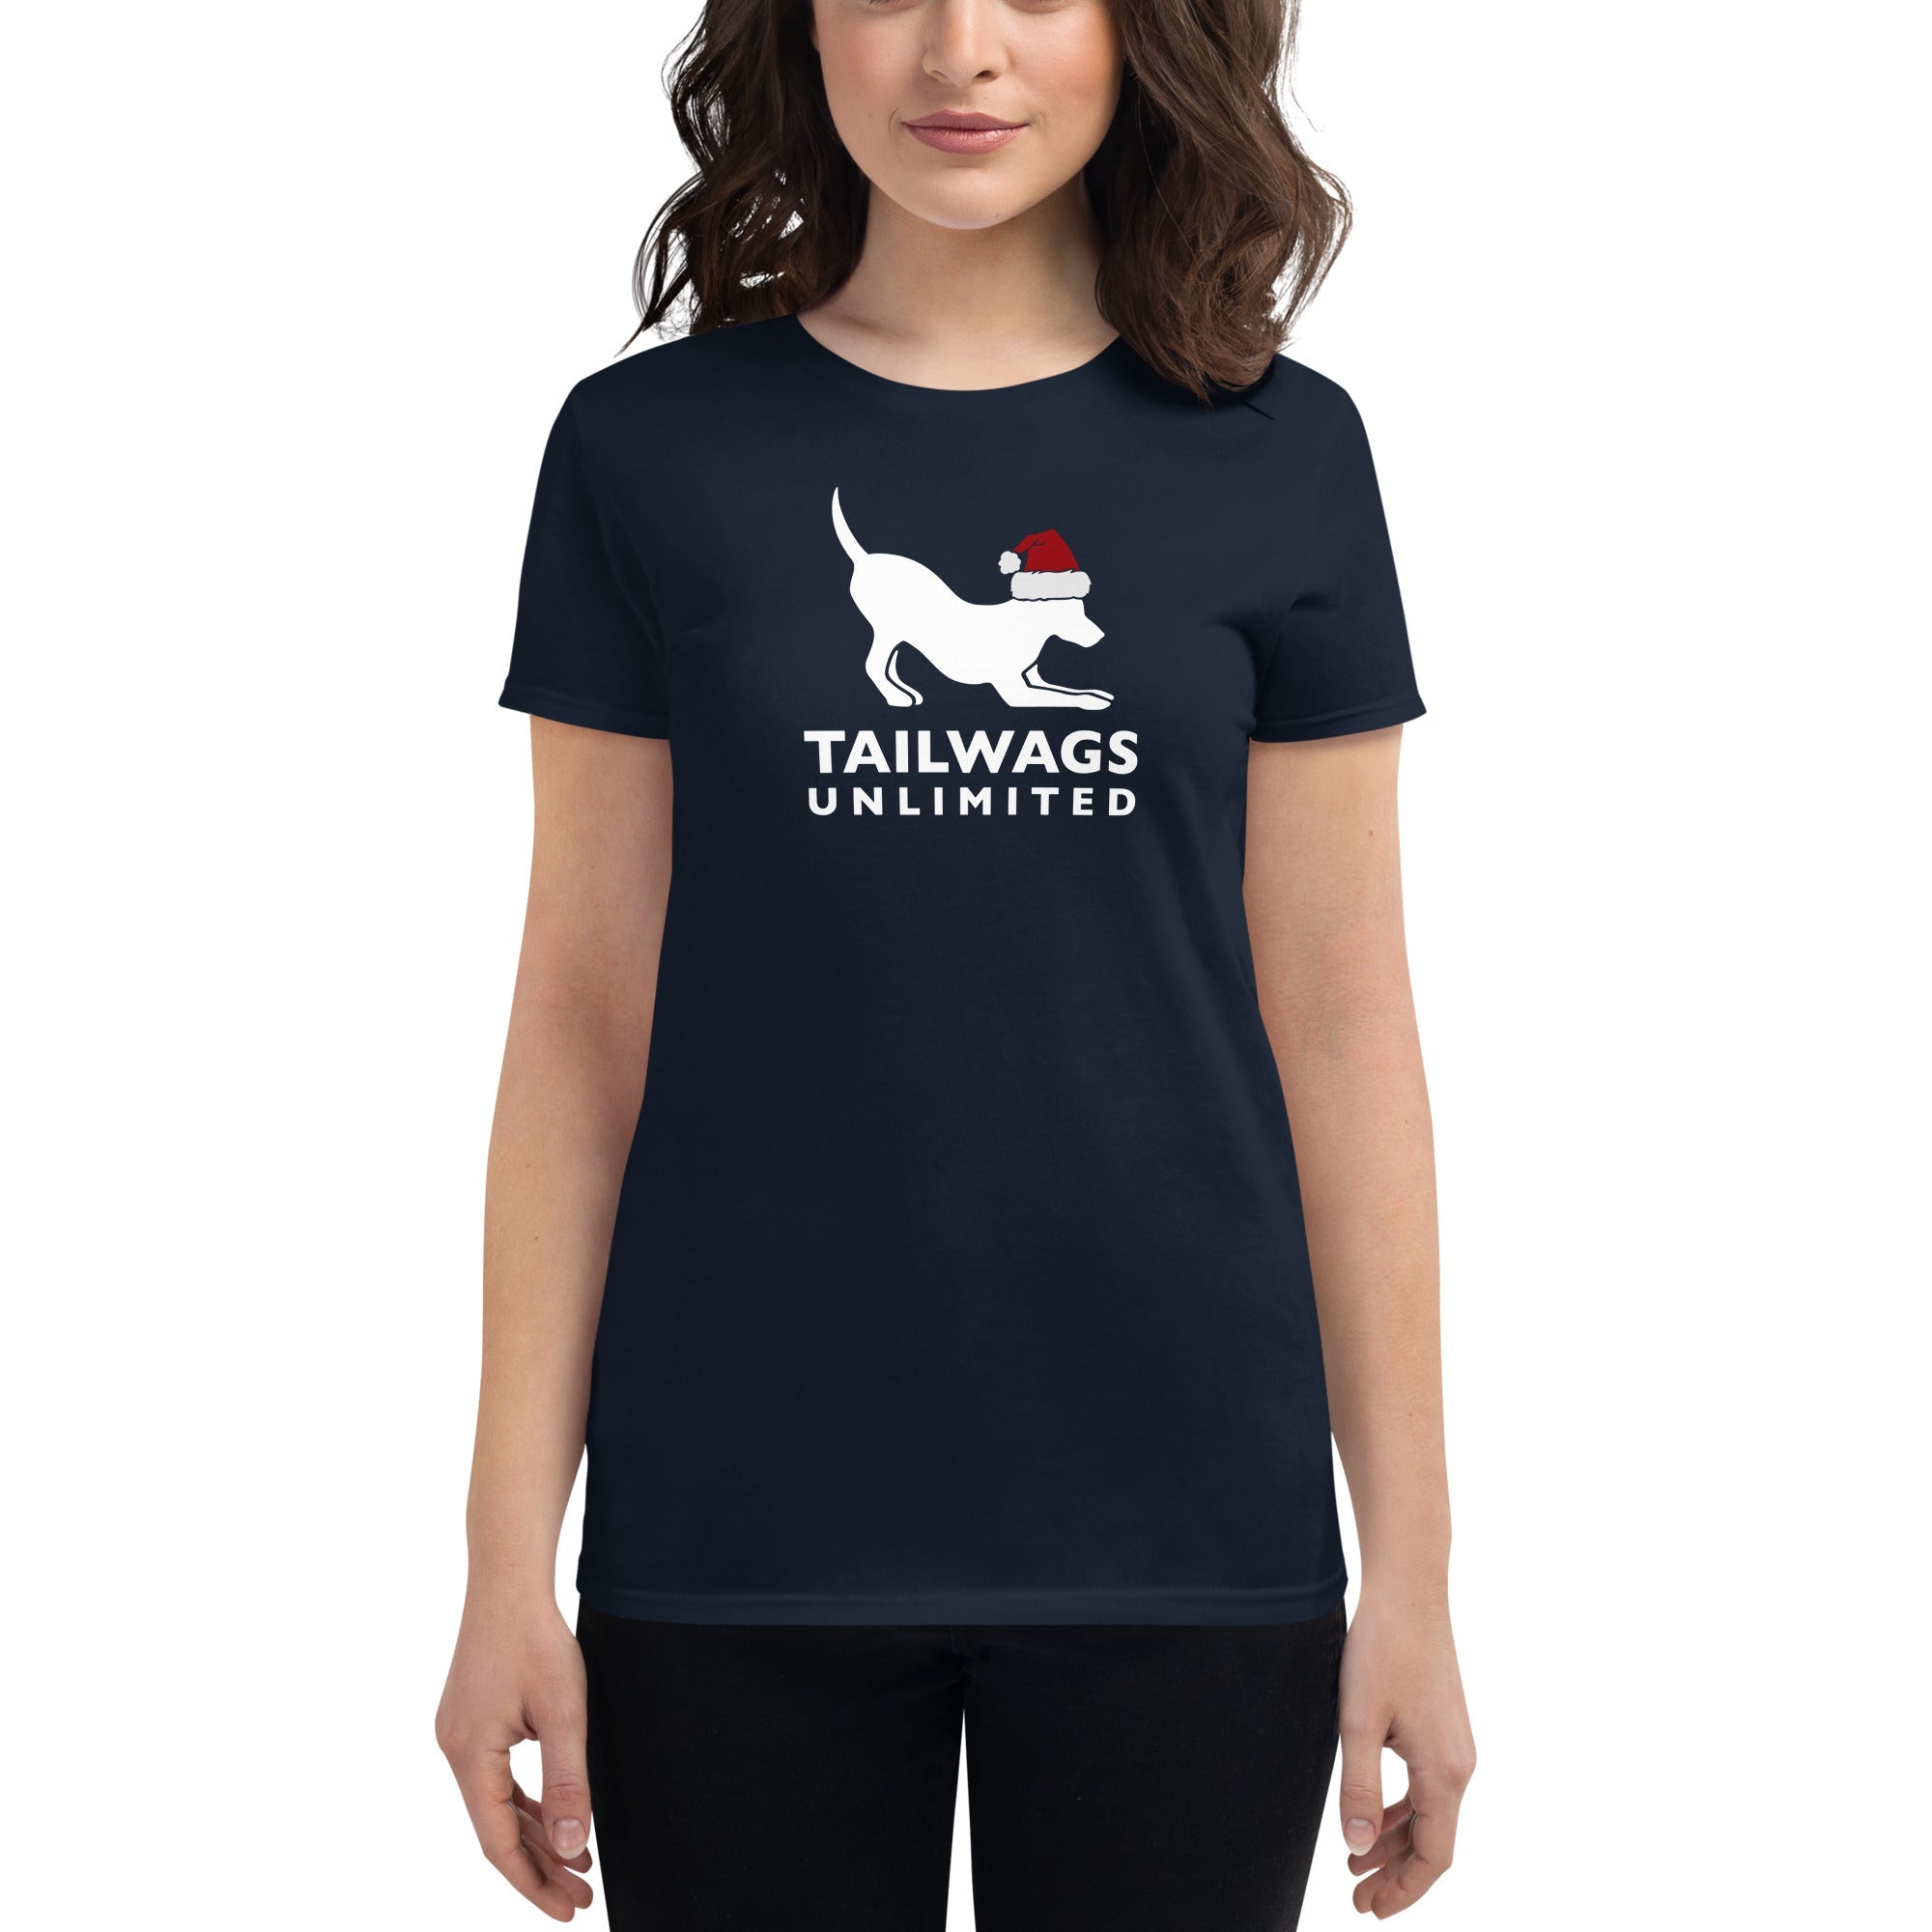 Red Santa Hat Logo Women's Fit T-Shirt - TAILWAGS UNLIMITED